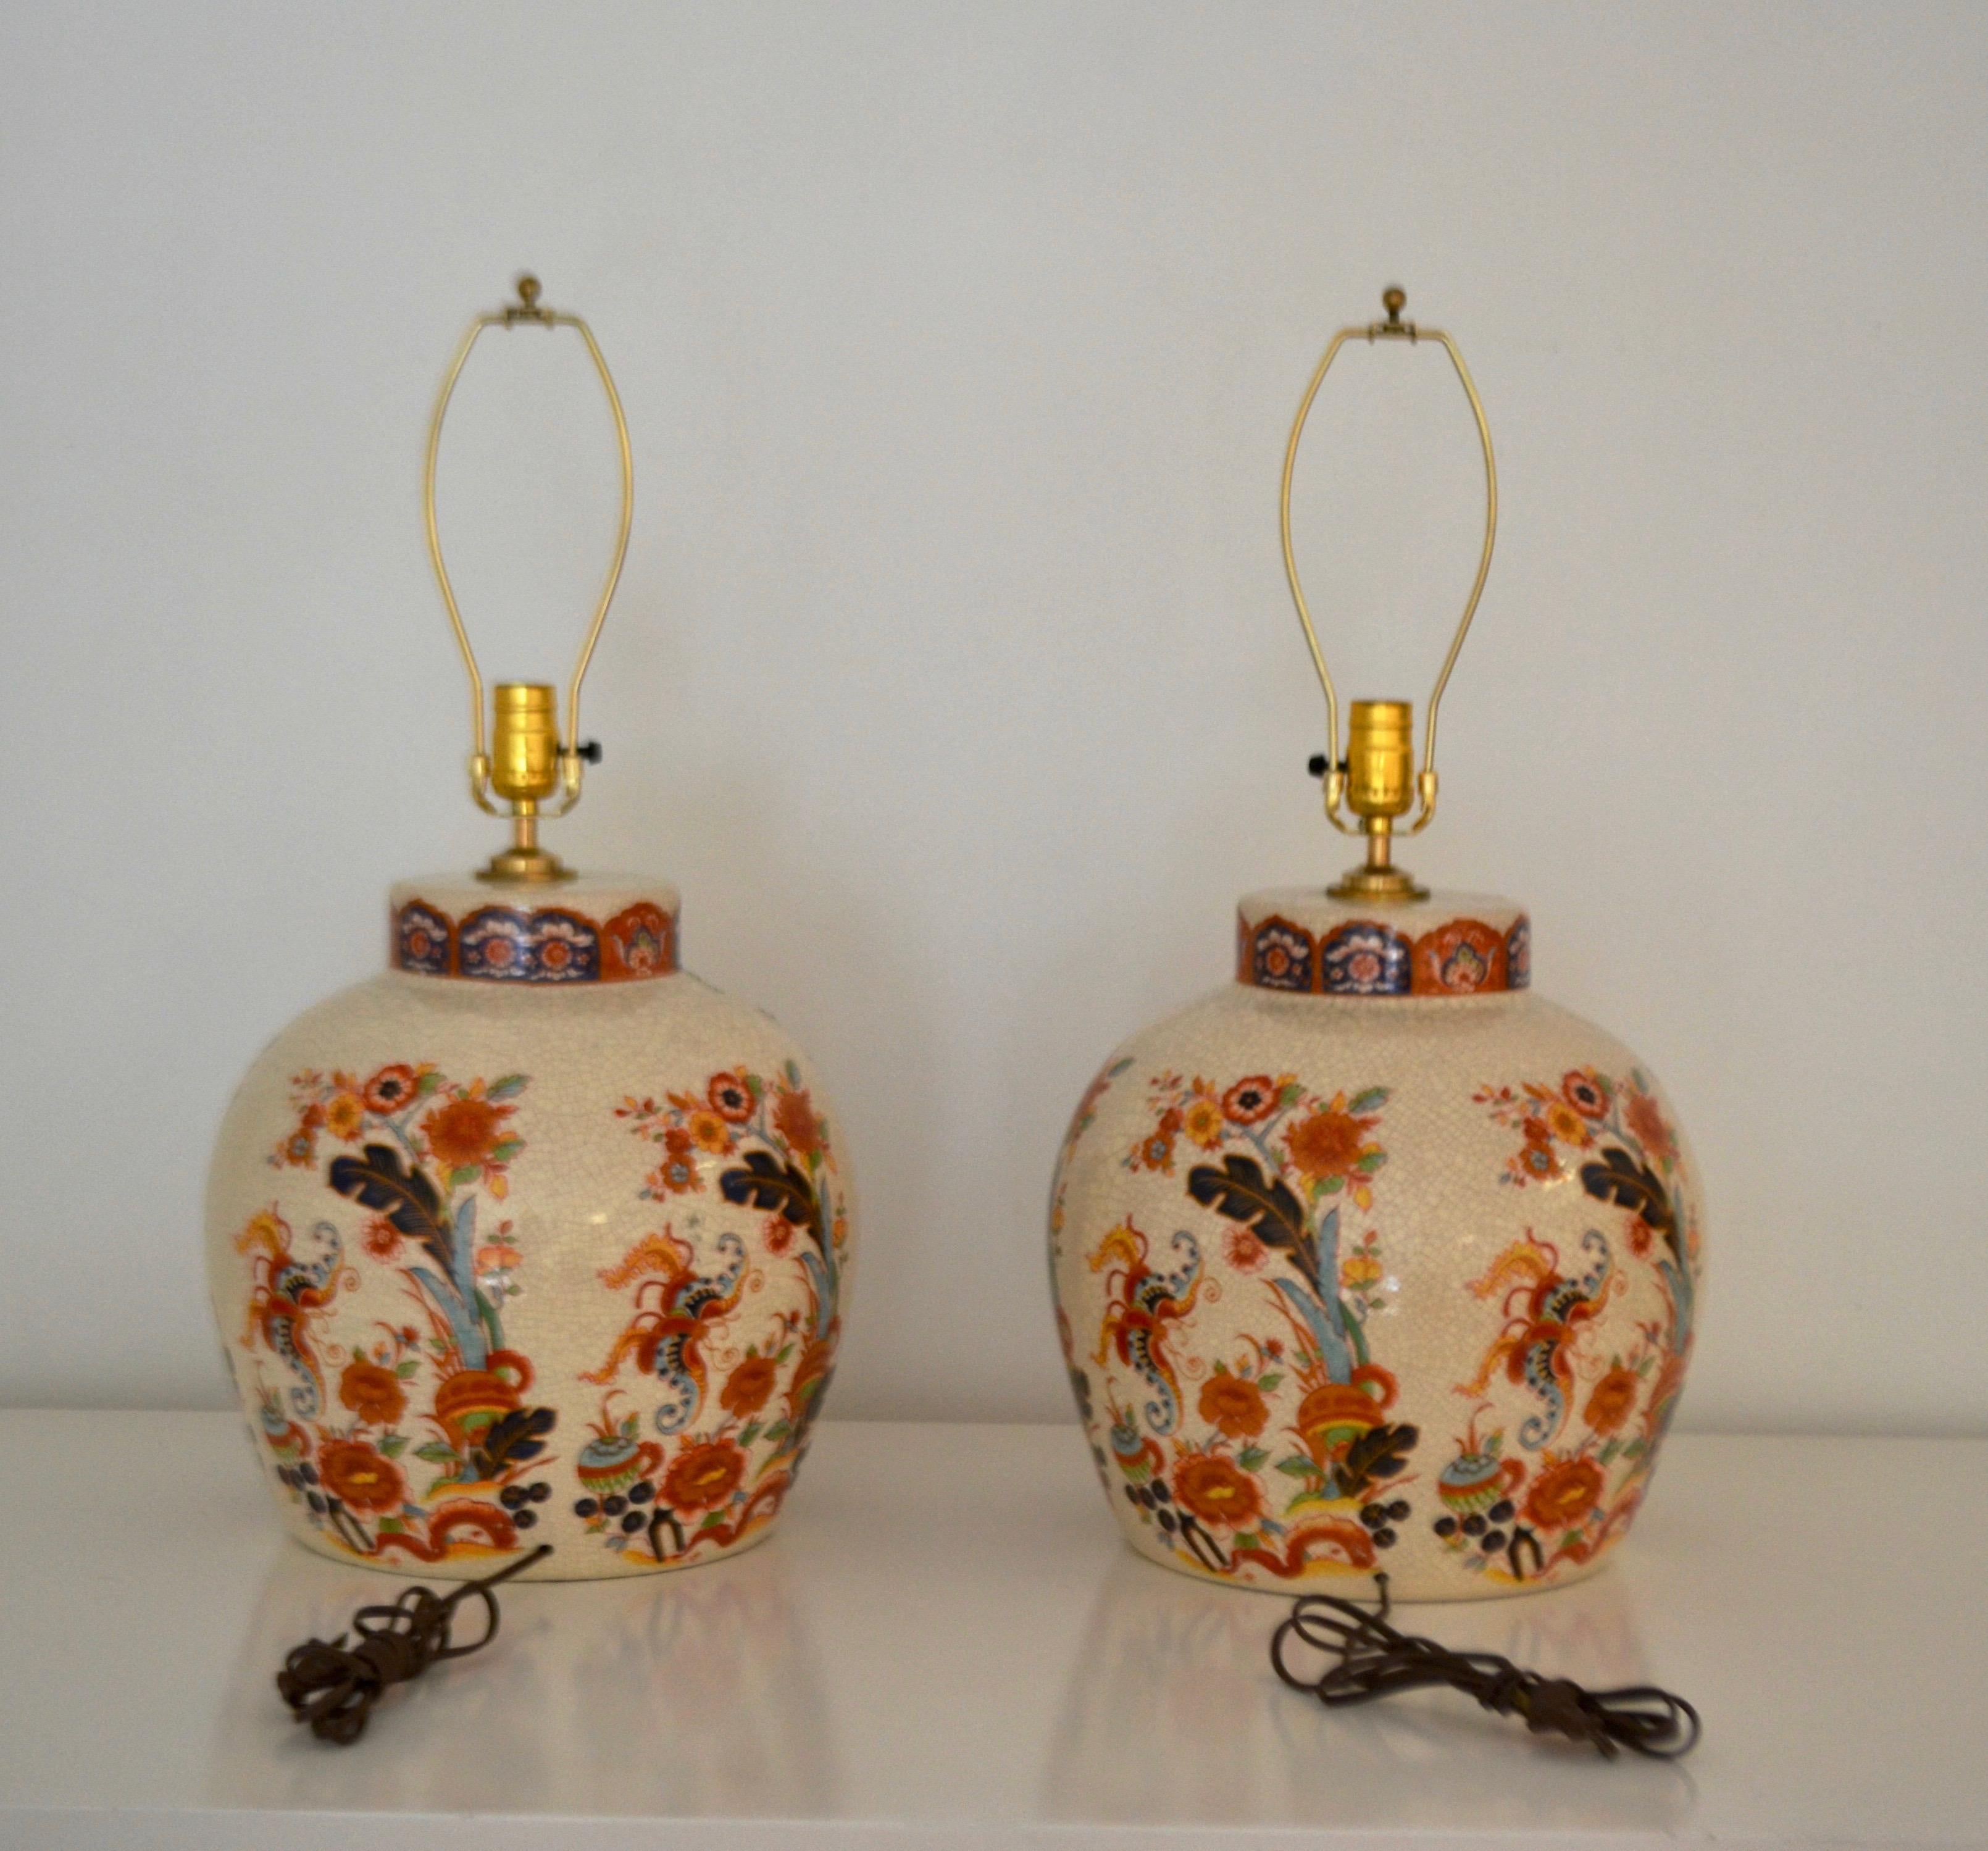 Pair of Ceramic Crackle Glazed Jar Form Table Lamps In Good Condition For Sale In West Palm Beach, FL